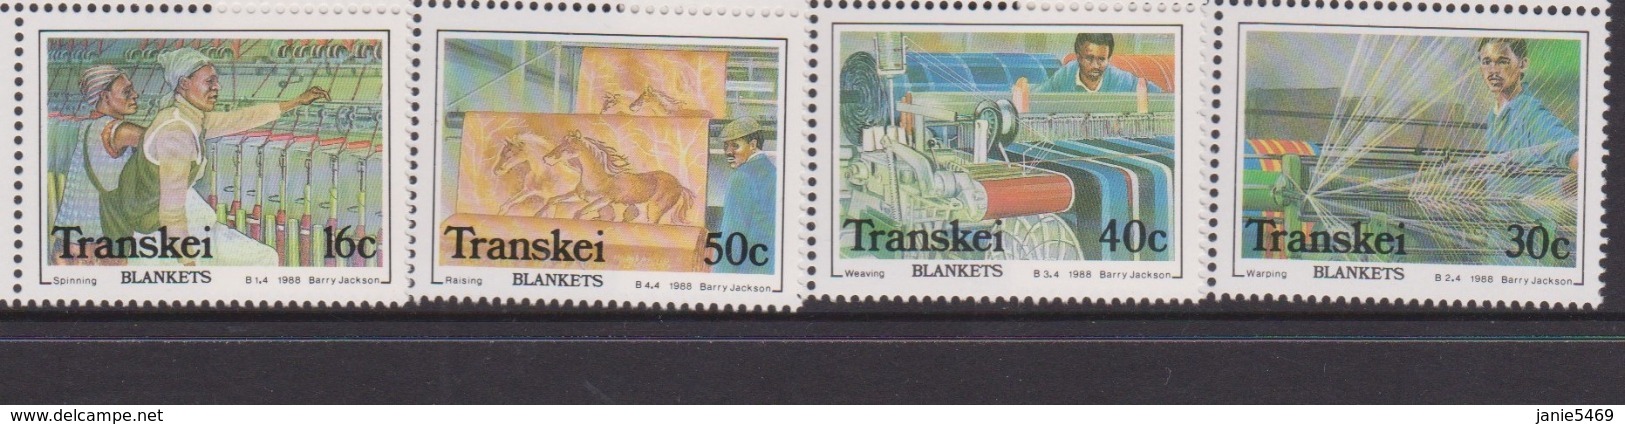 South Africa-Transkei SG 217-220 1988 Blankets Factory,Mint Never Hinged - Transkei